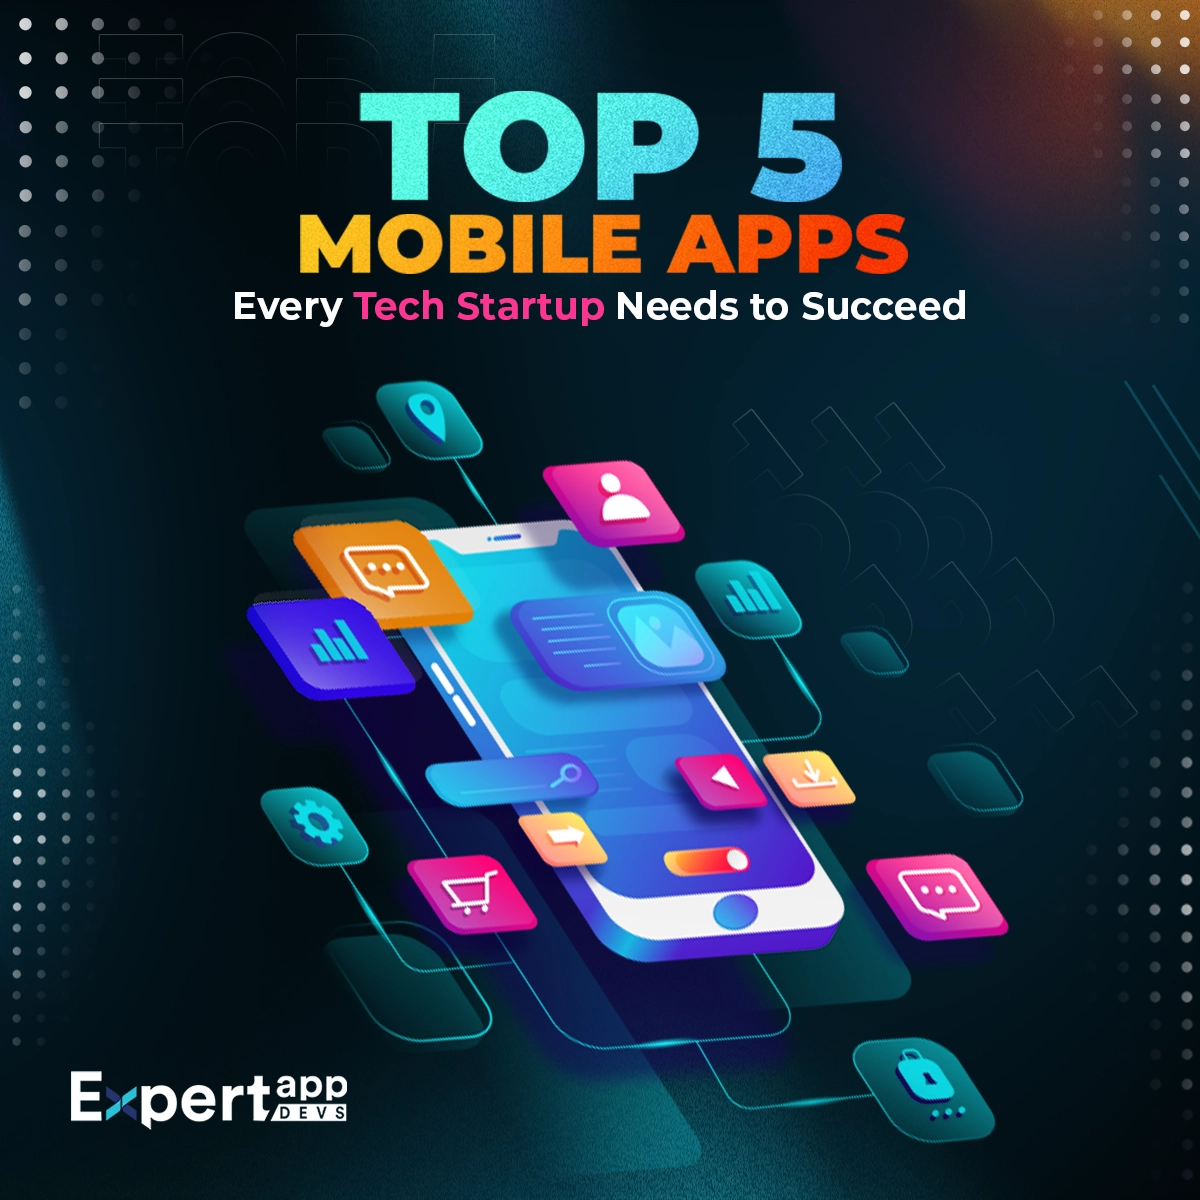 Top 5 Mobile Apps Every Tech Startup Needs to Succeed